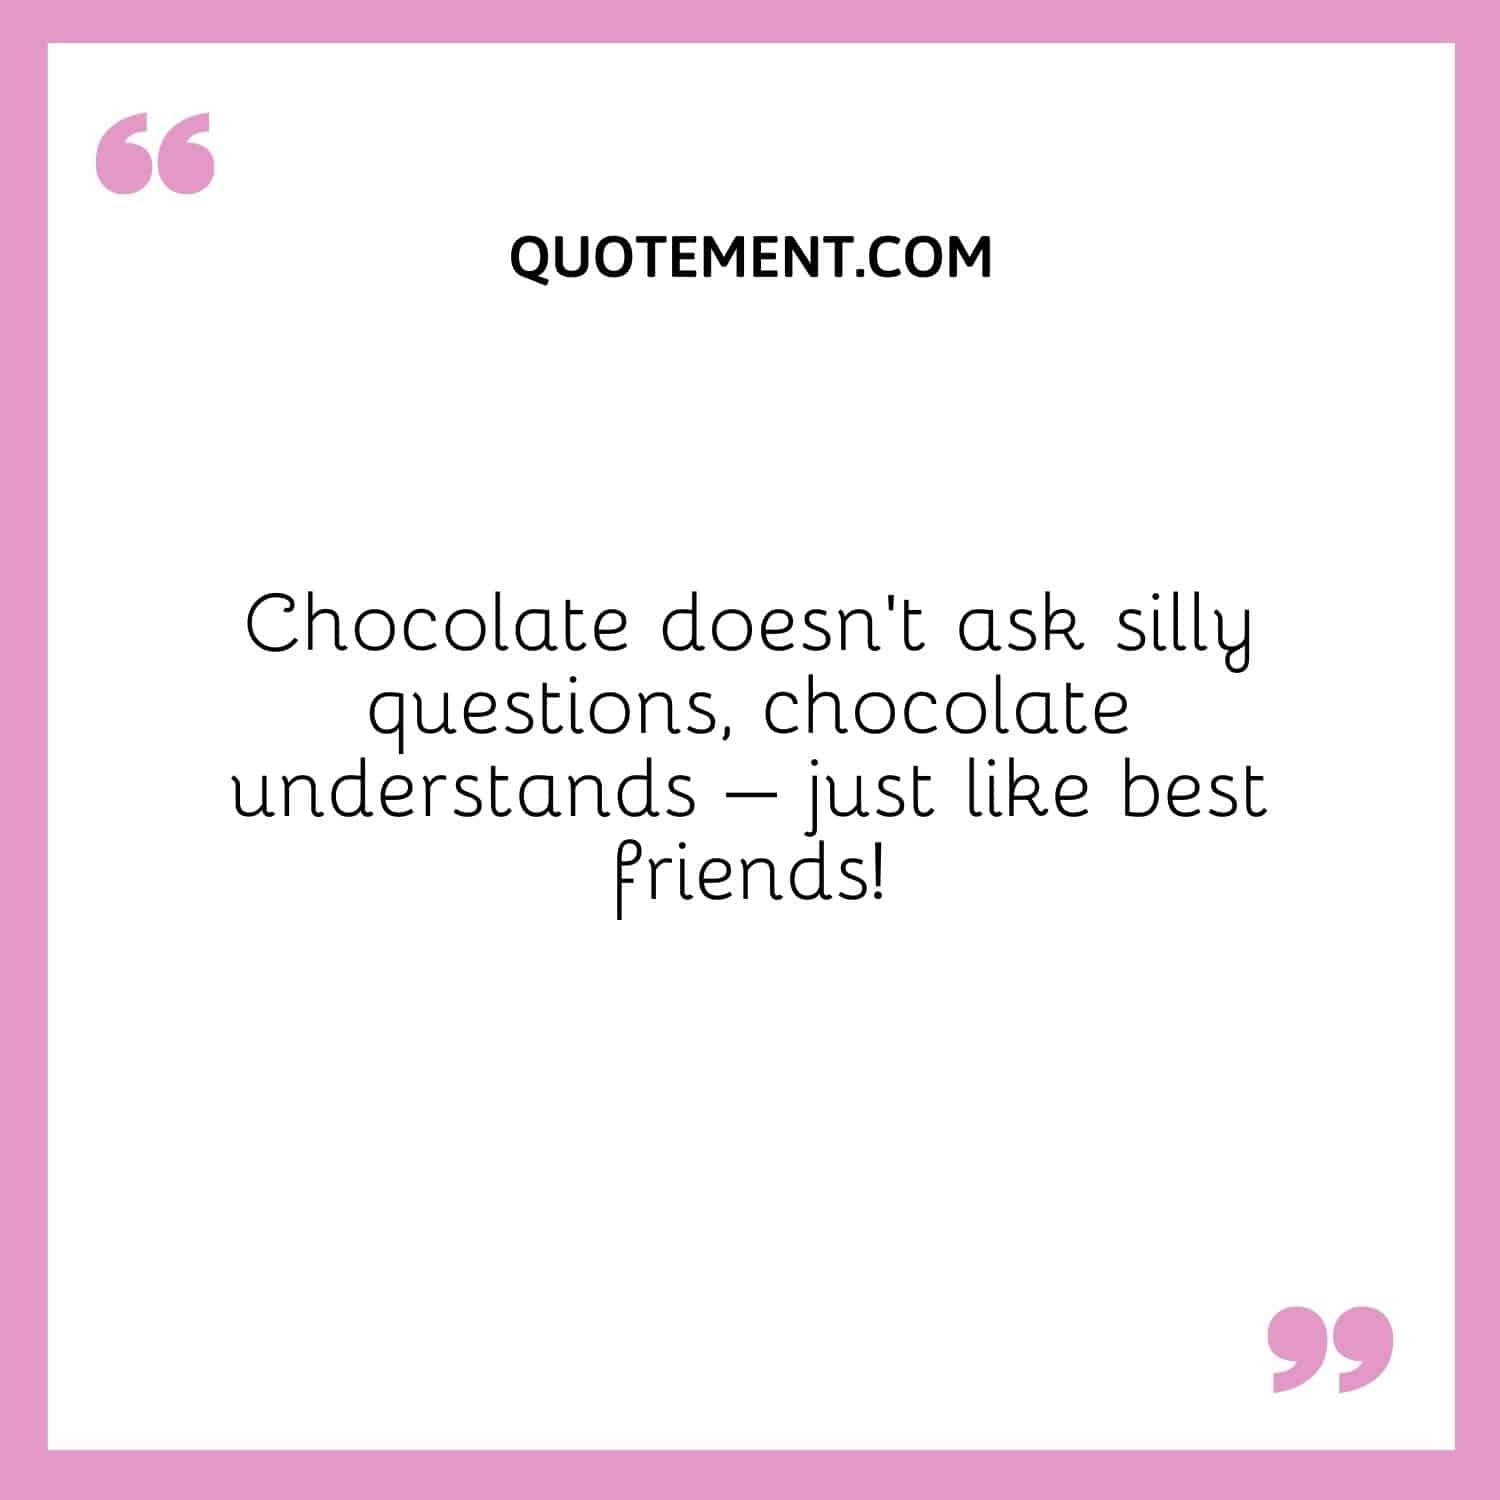 Chocolate doesn’t ask silly questions, chocolate understands